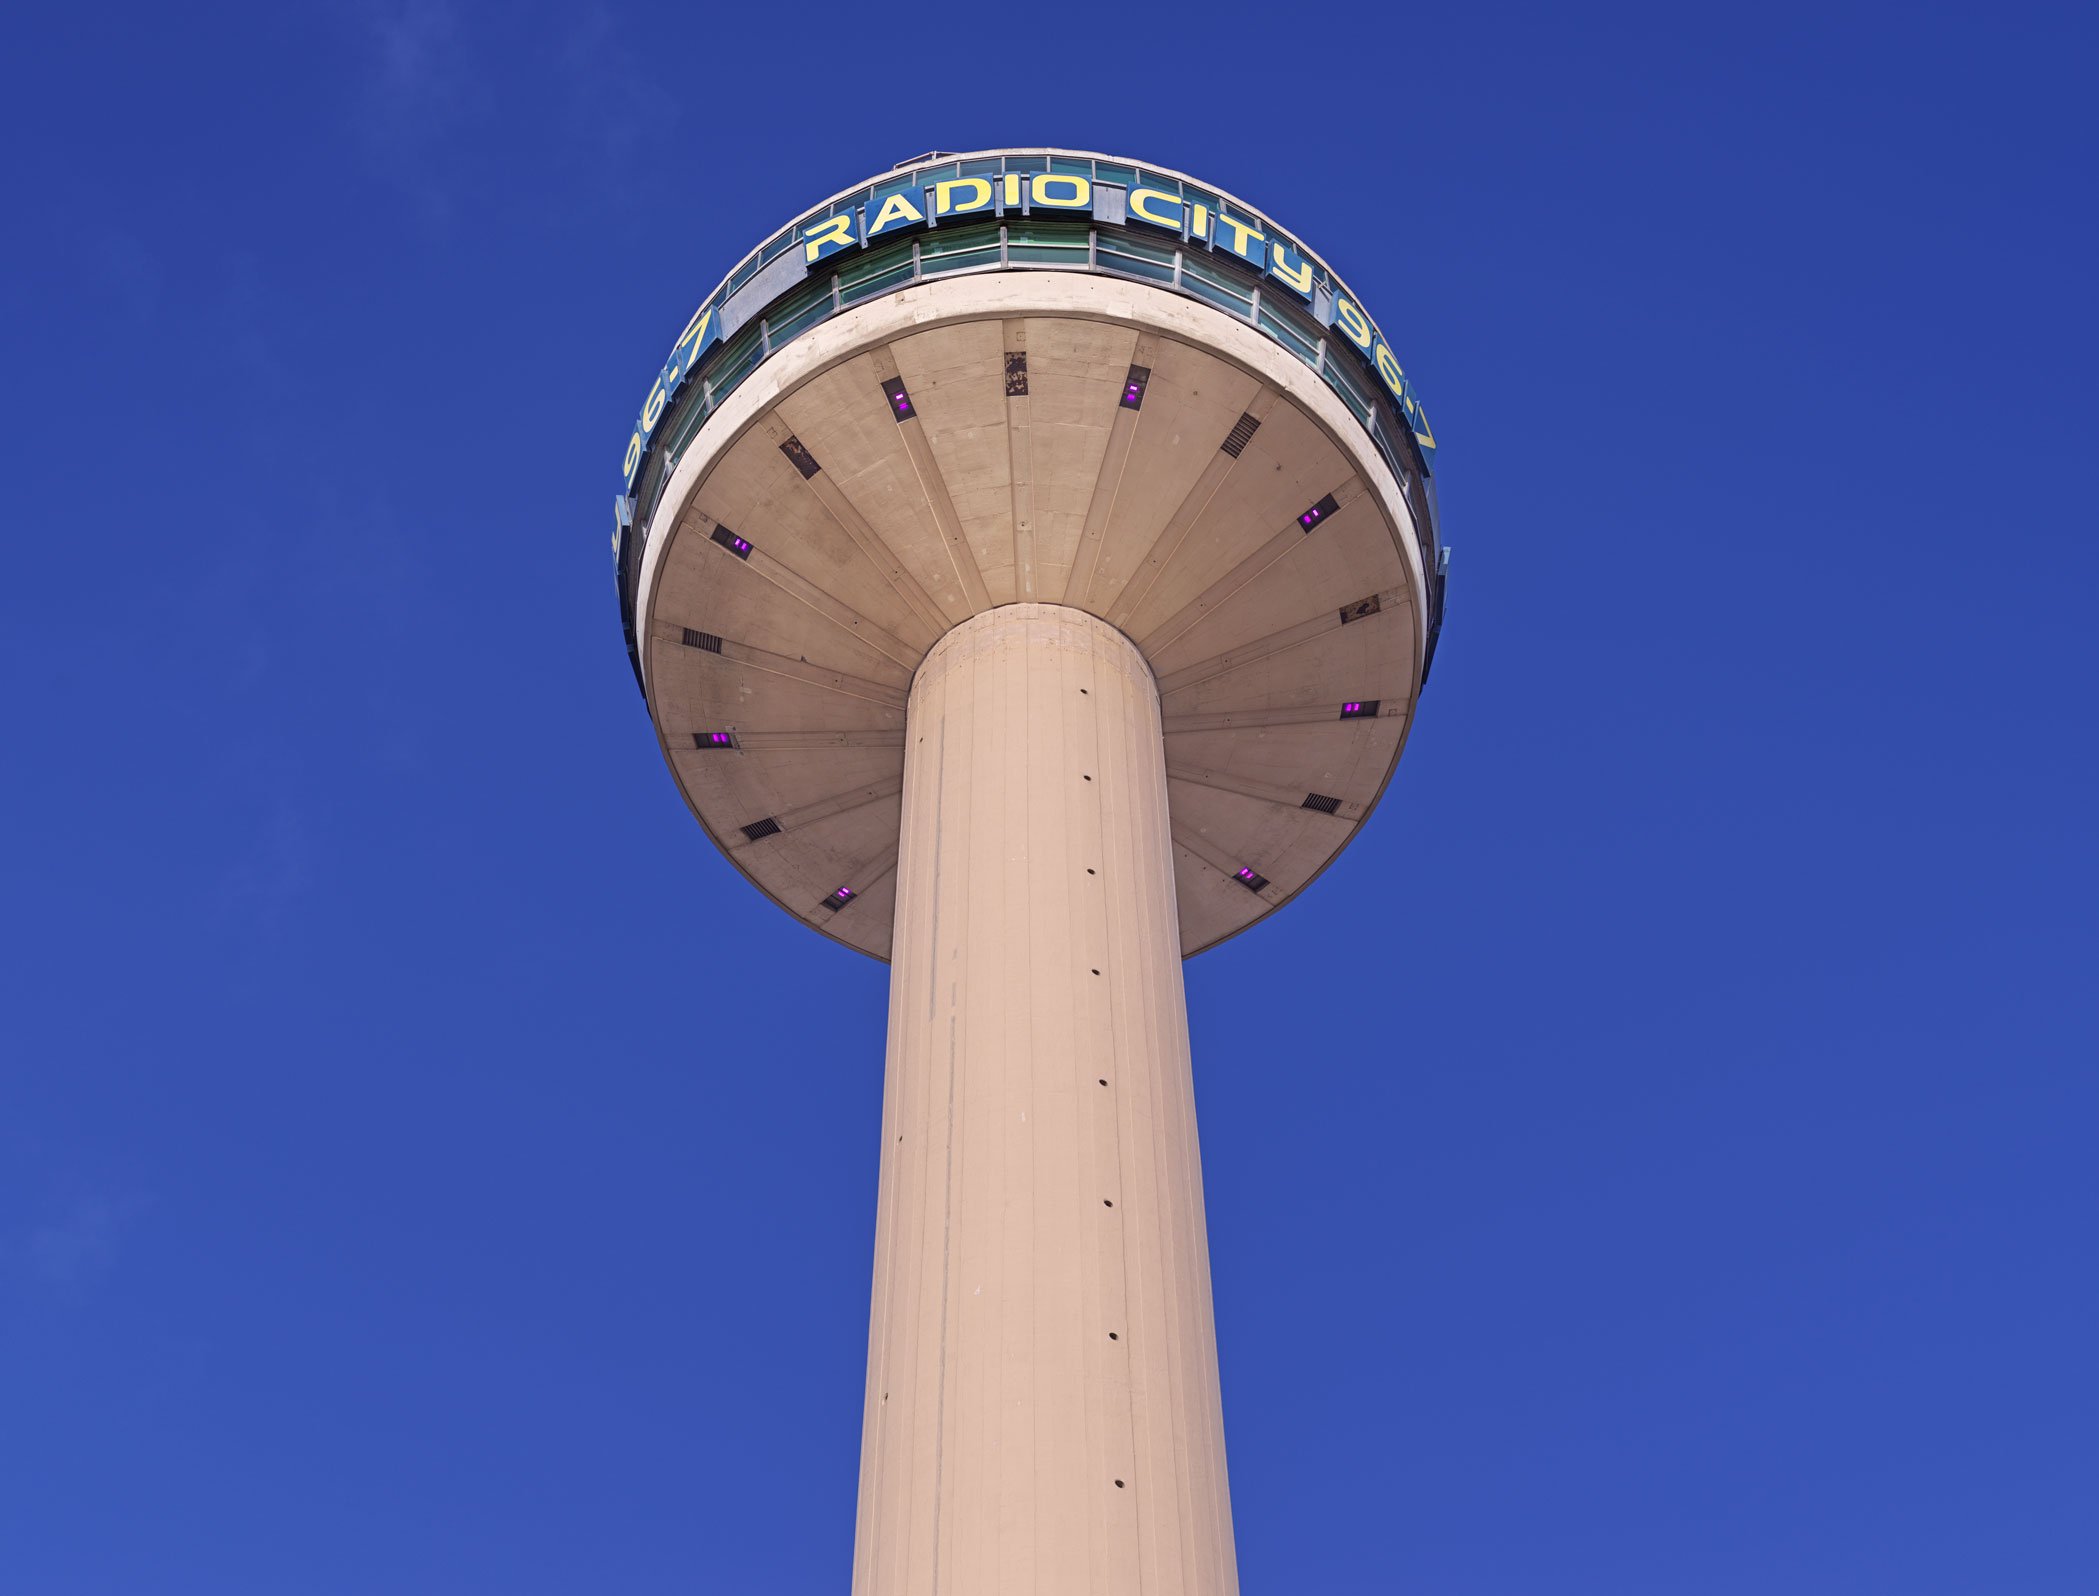 Photograph of the upper portion of a tall concrete radio tower with a circular viewing platform at the top.